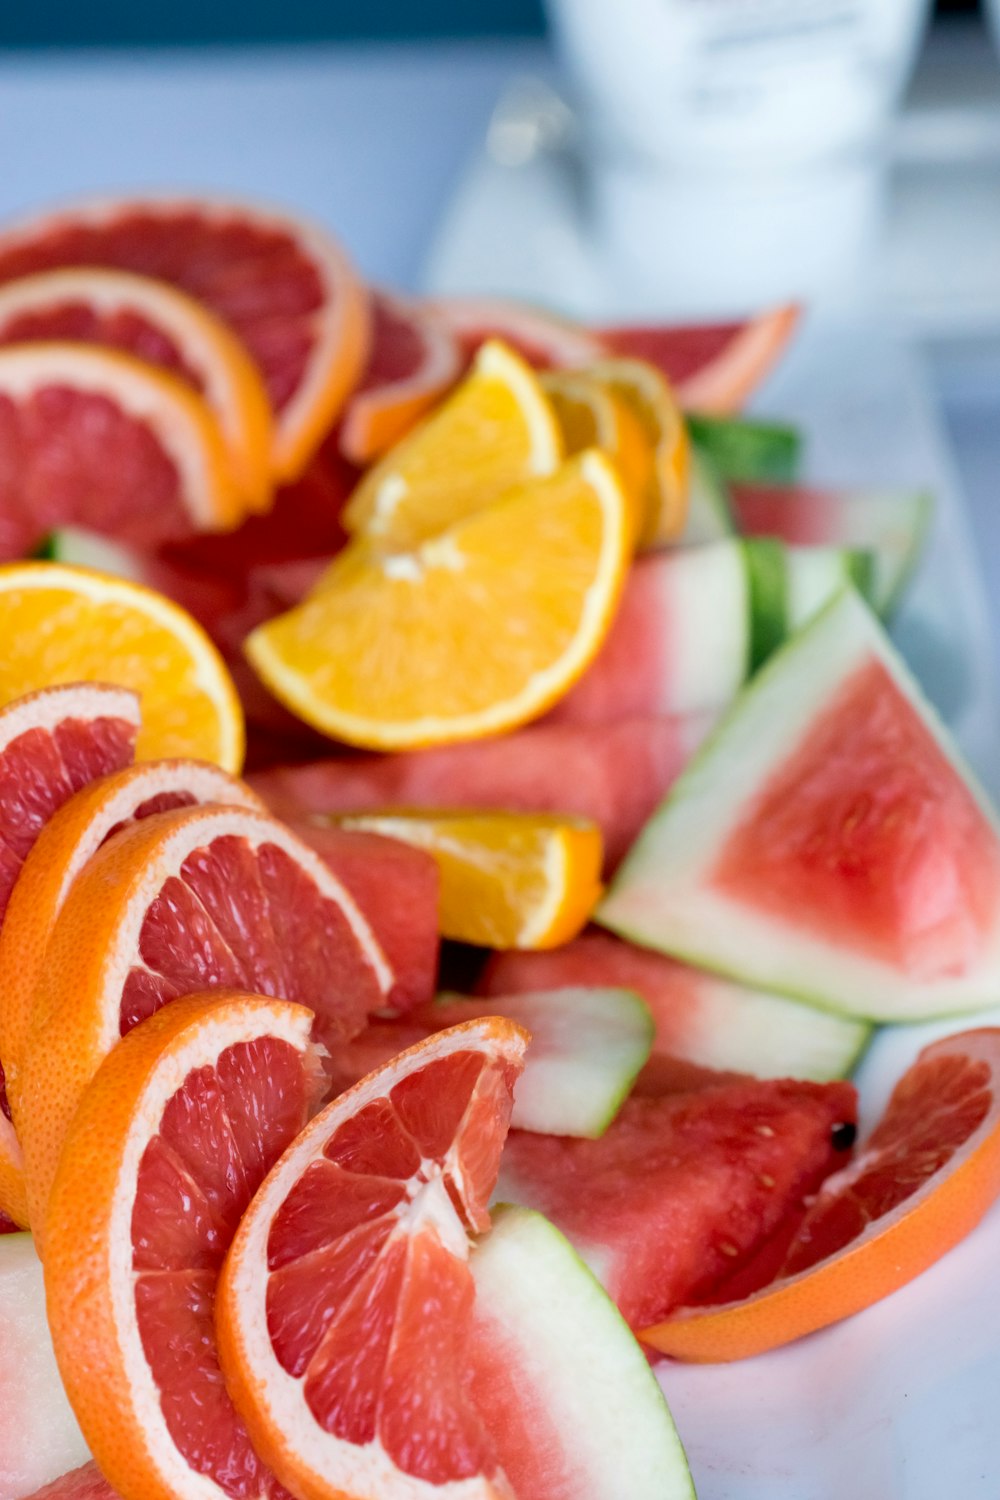 sliced citrus and melons